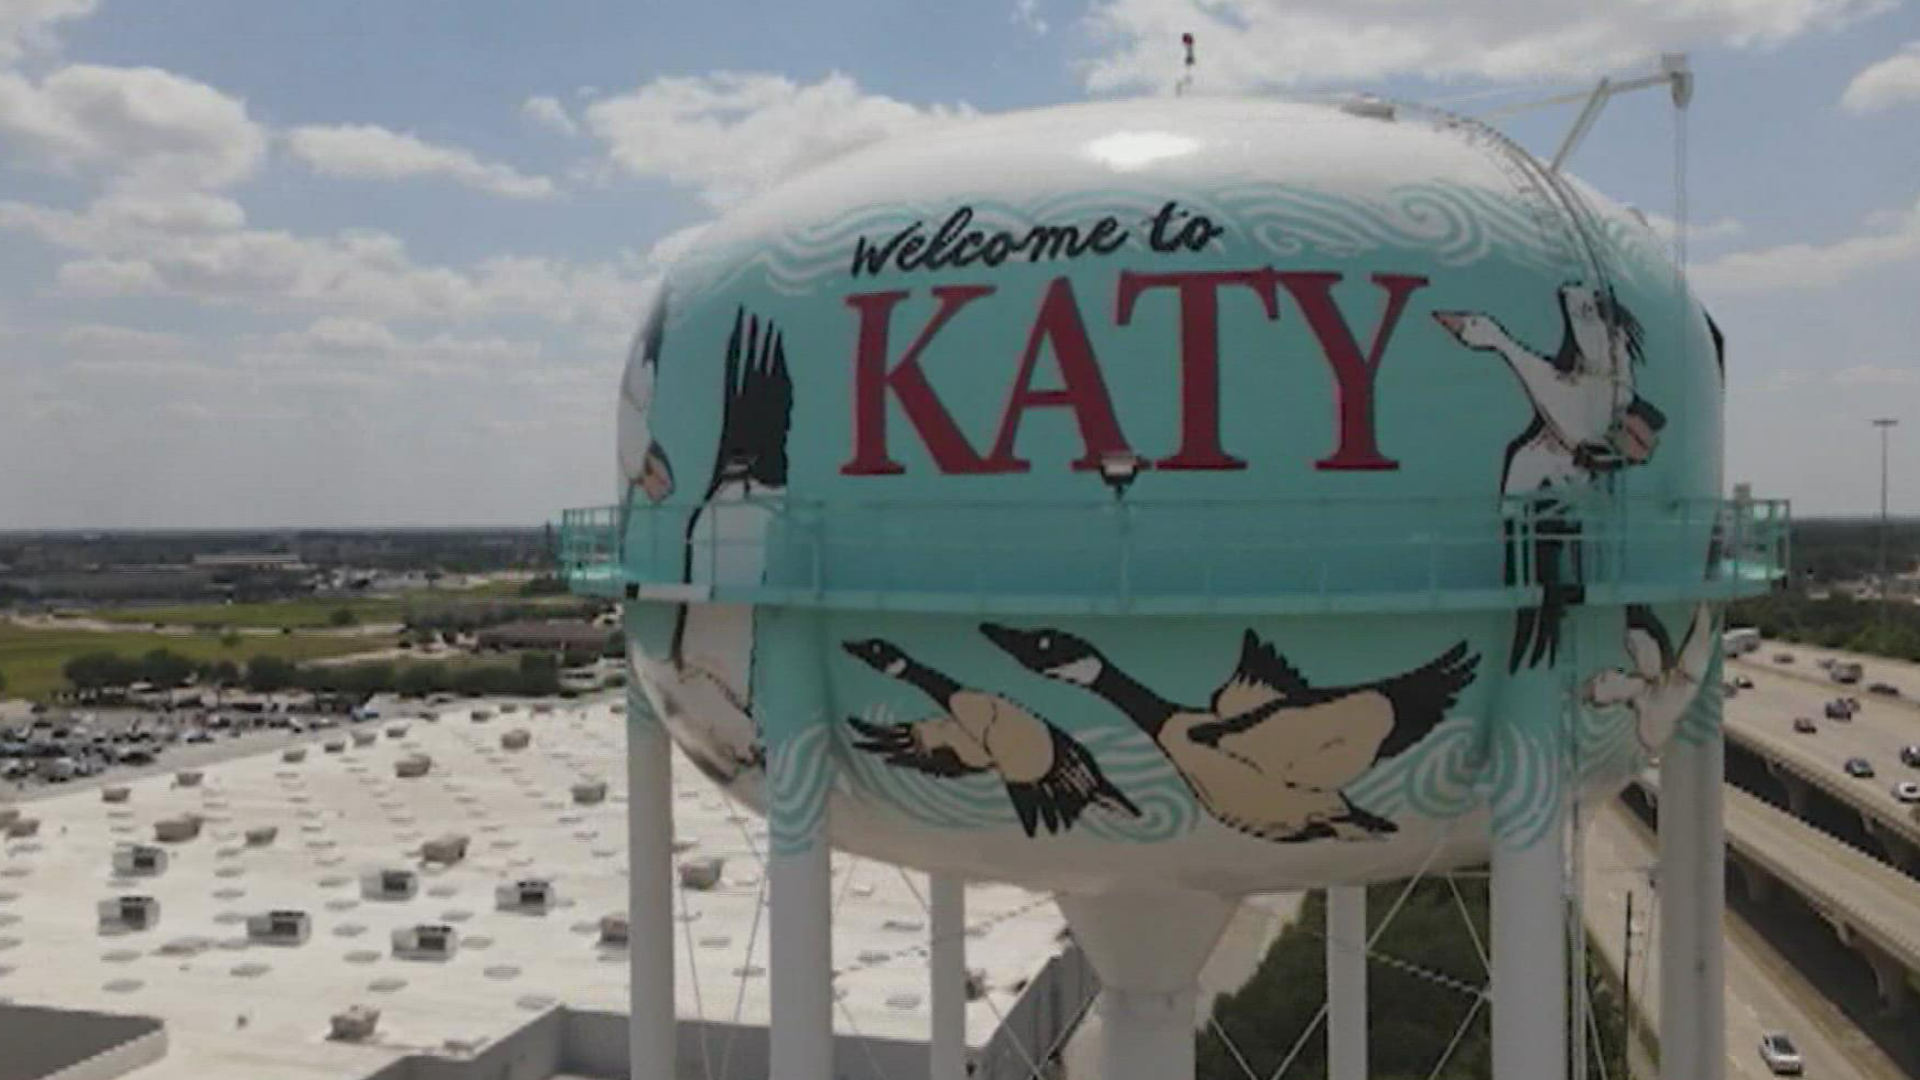 The city of Katy is recommending residents make changes to help conserve water.